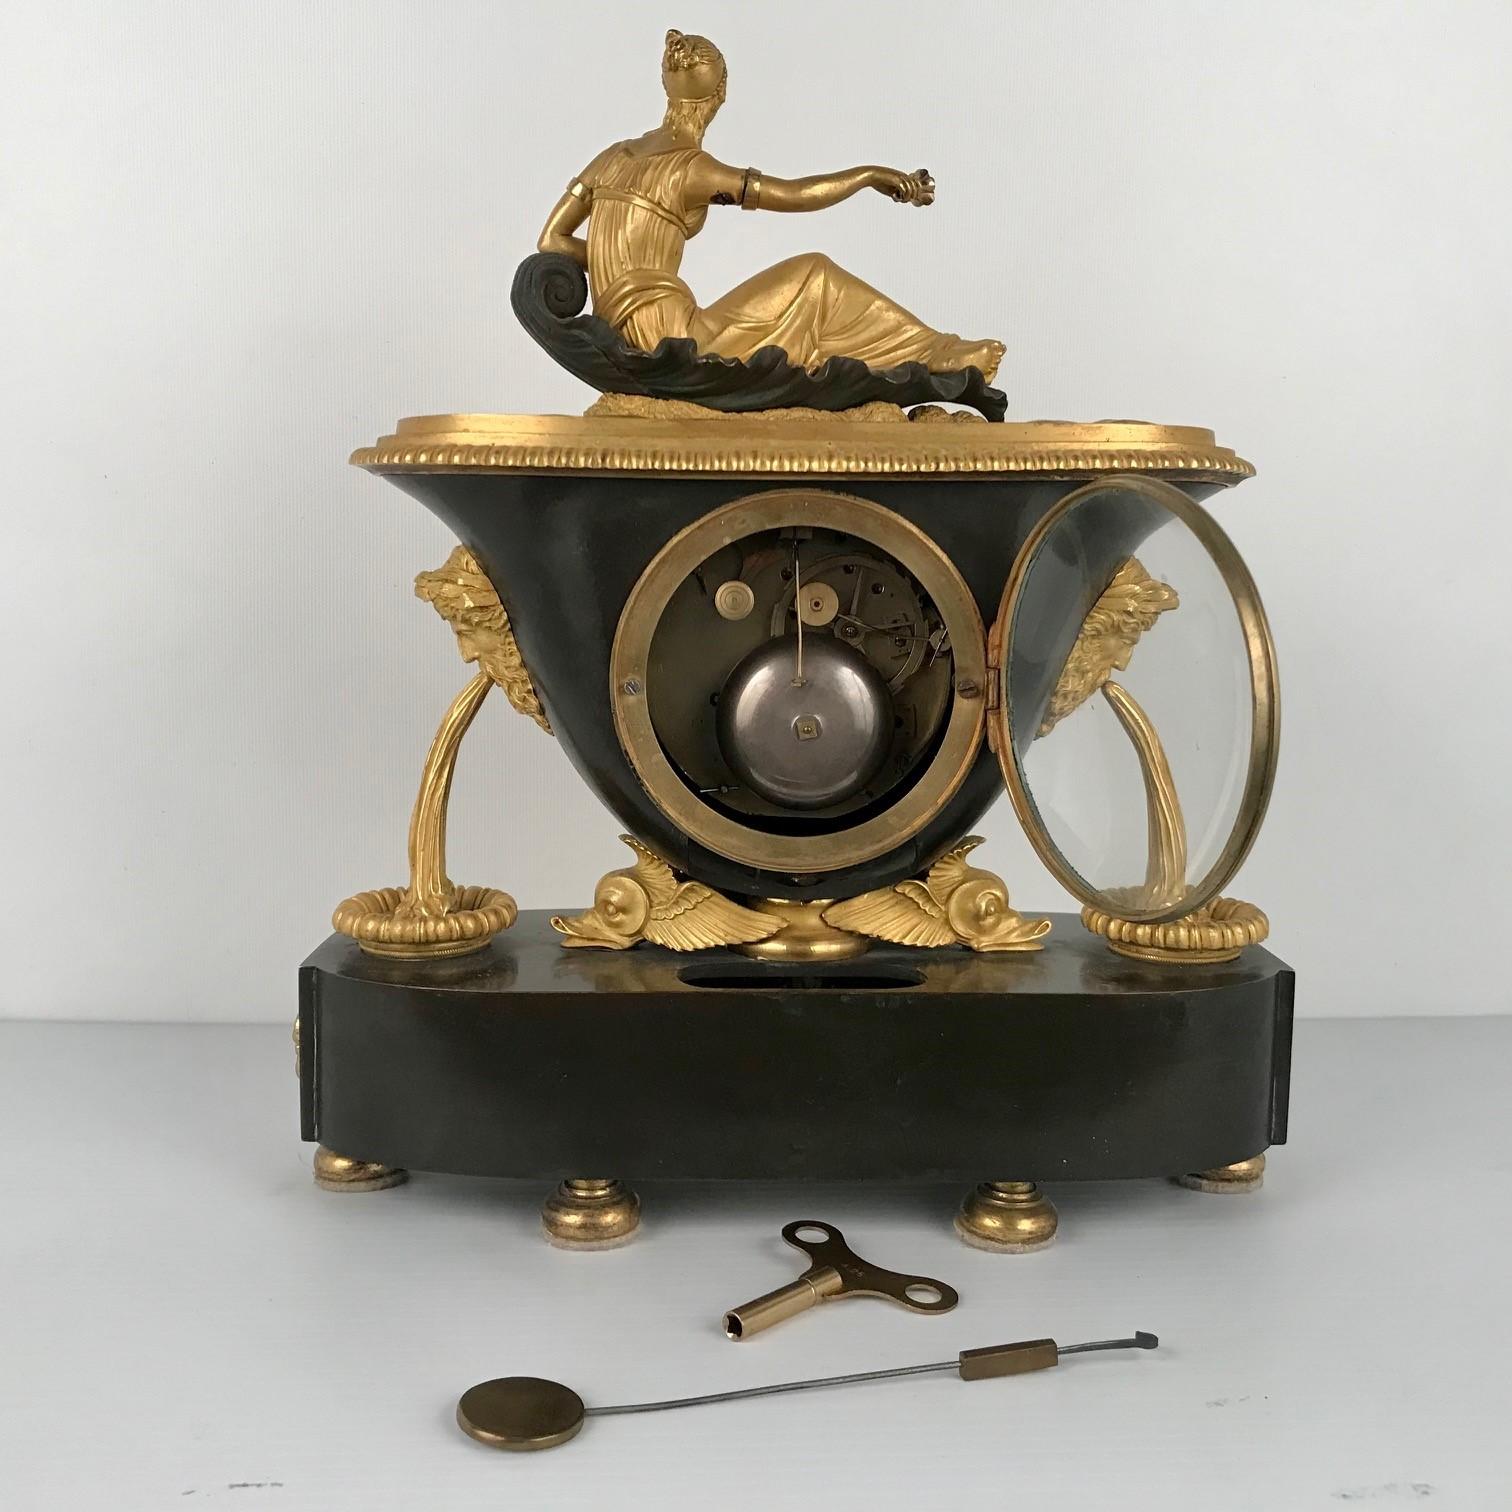 Empire Period Mantle Clock by Leroy a Paris In Good Condition For Sale In Montreal, QC